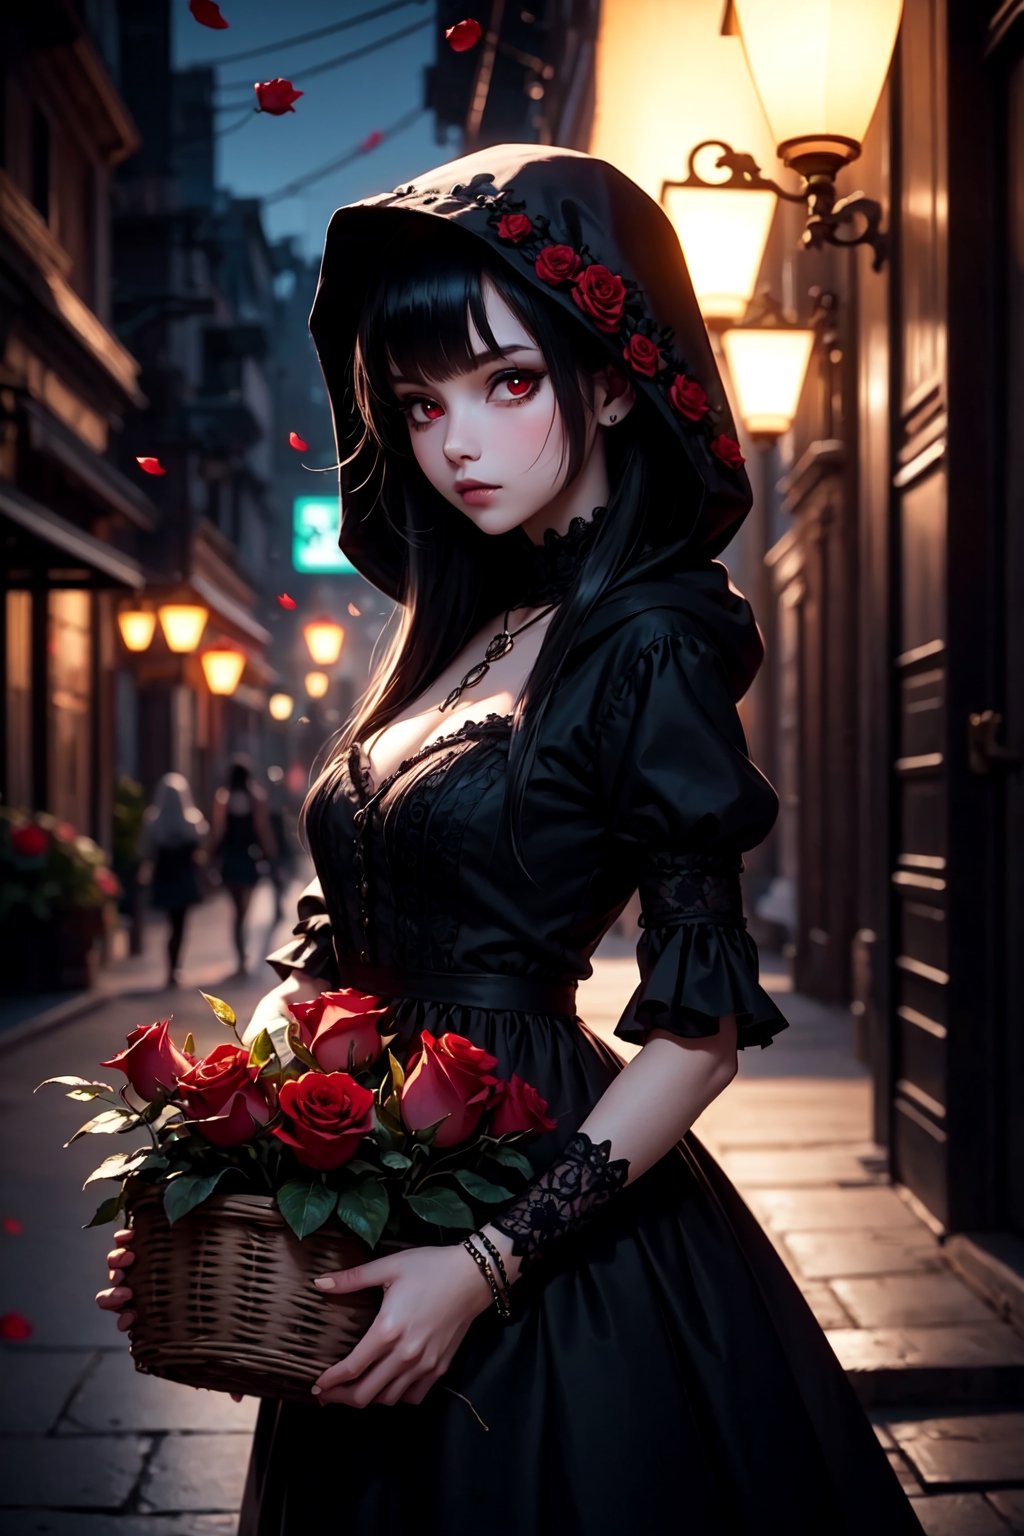  a goth girl, flower, solo, basket, little black dress, holding flower, hood, holding a red rose, looking at viewer, red eyes, blurry, dress, cosplay, bangs, blurry background, frills, depth of field, red rose, at night